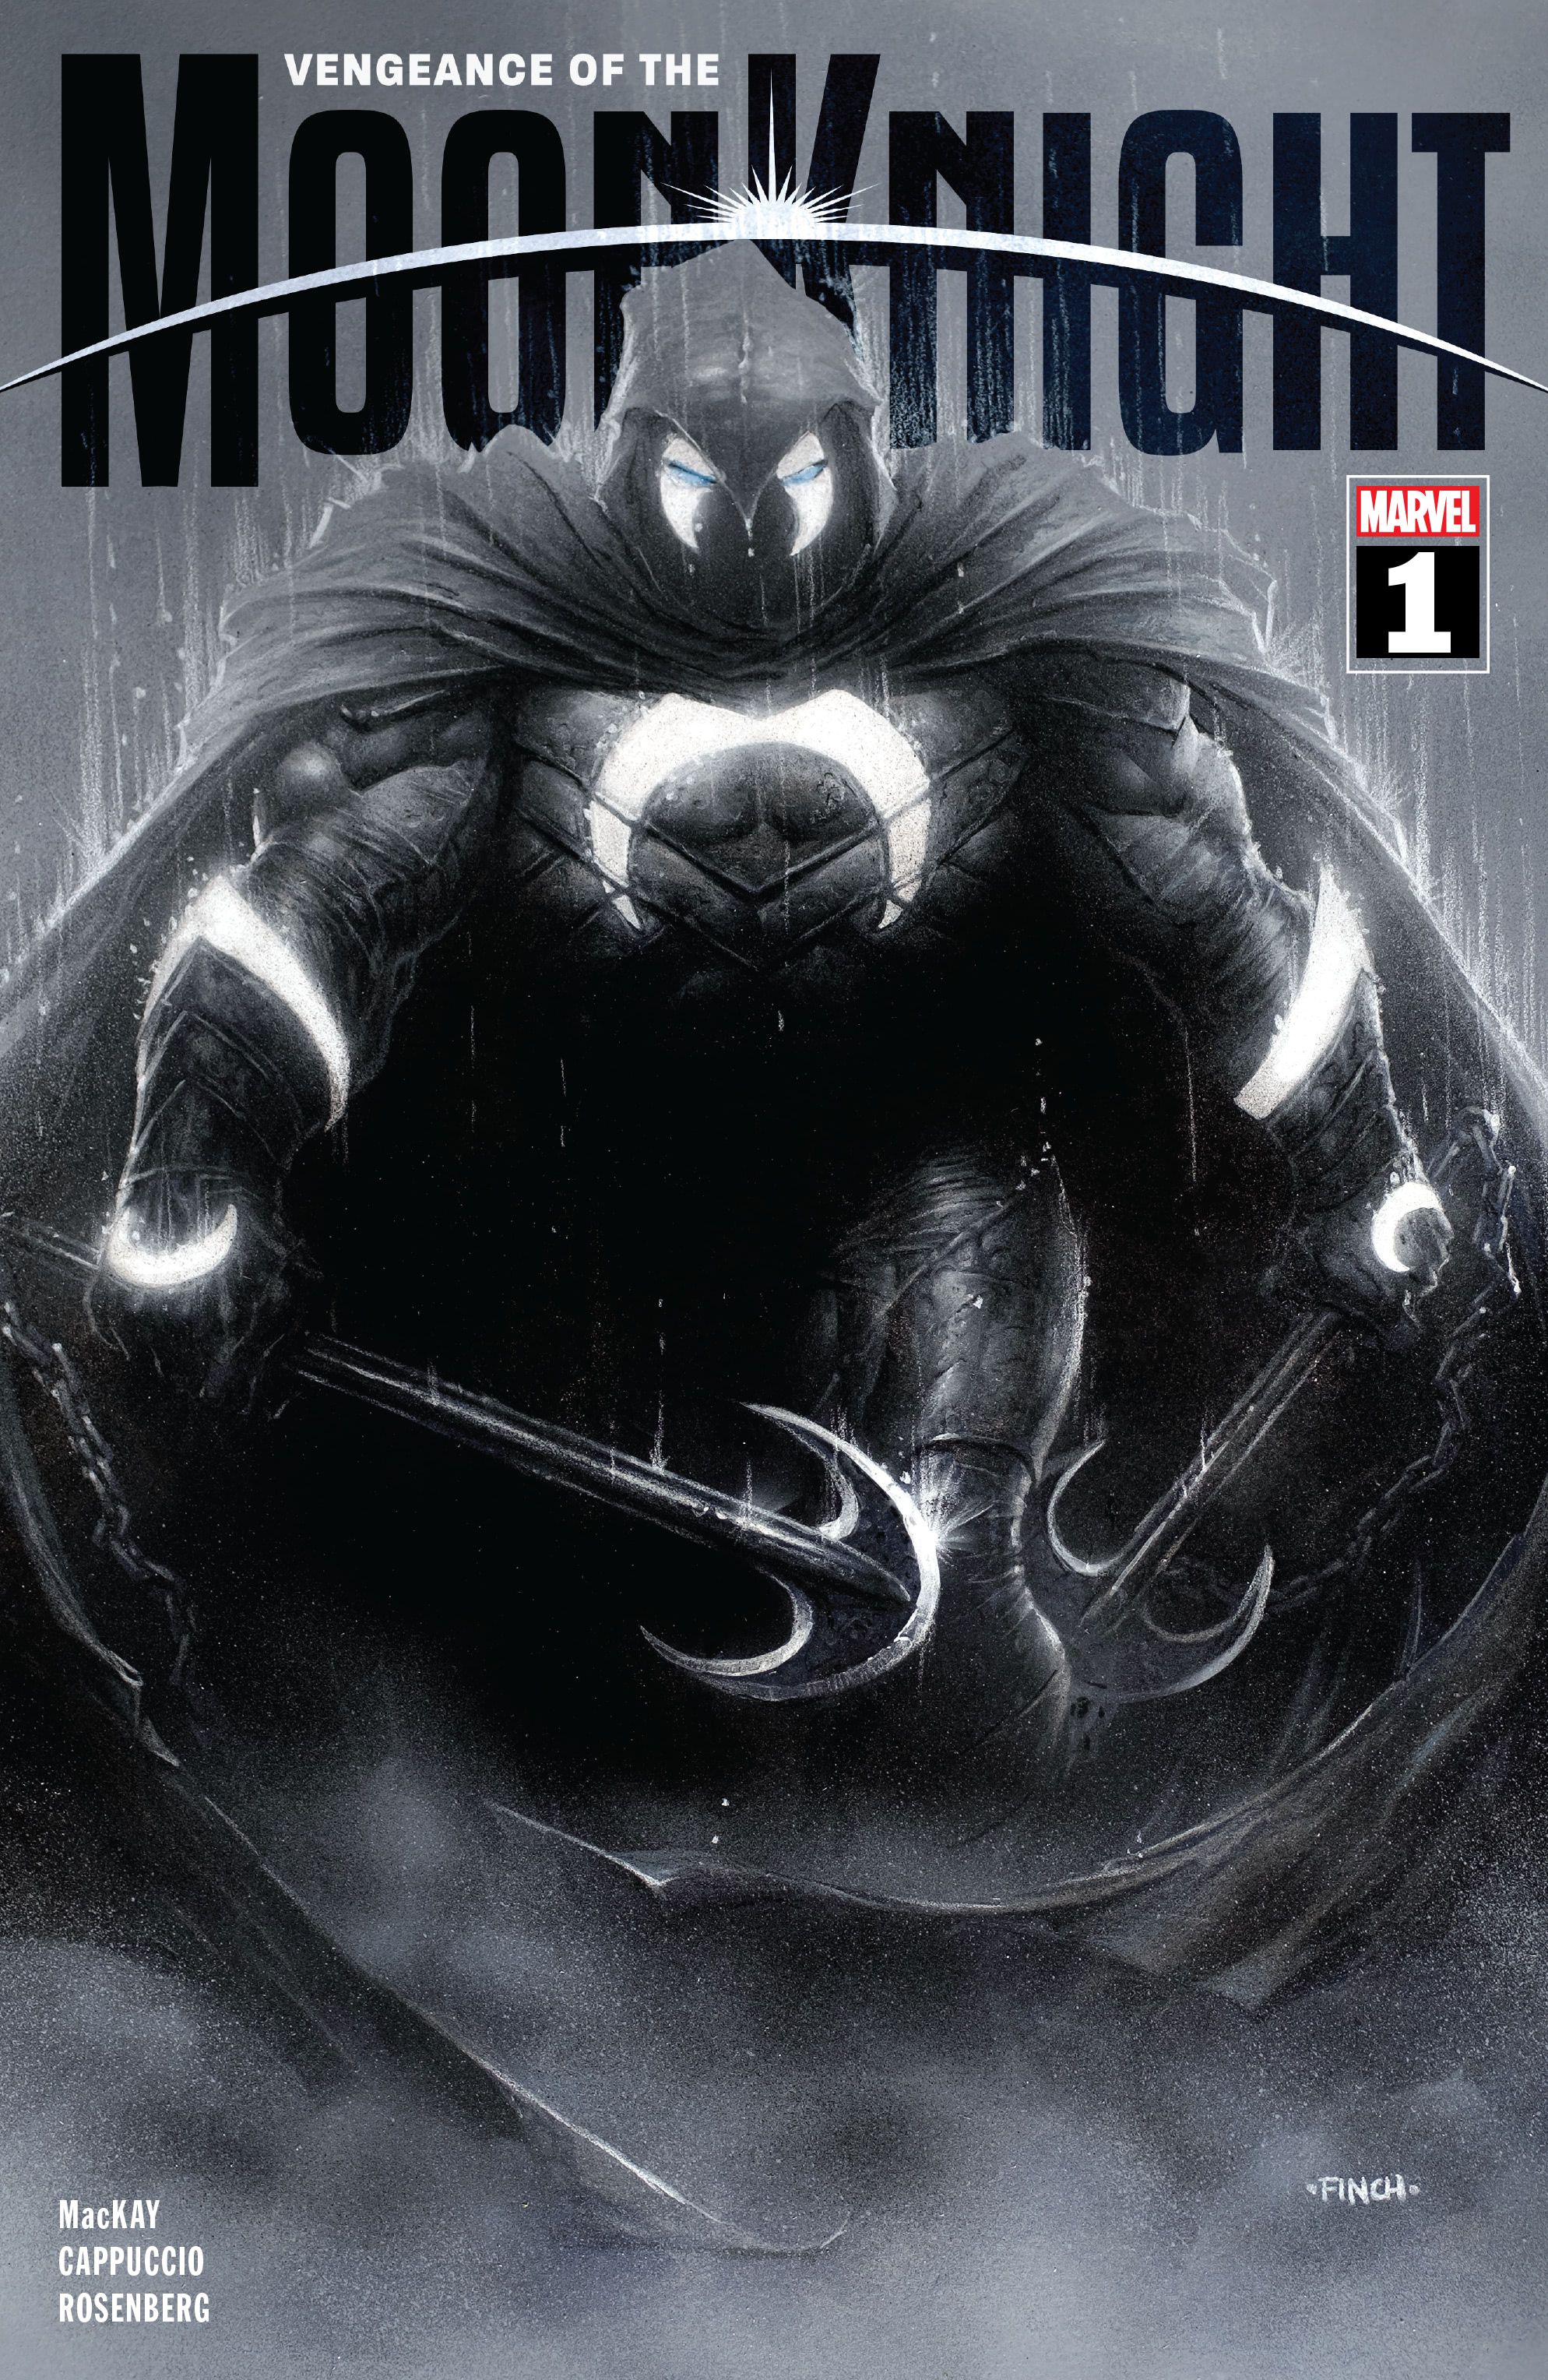 Vengeance of the Moon Knight #1 Cover A